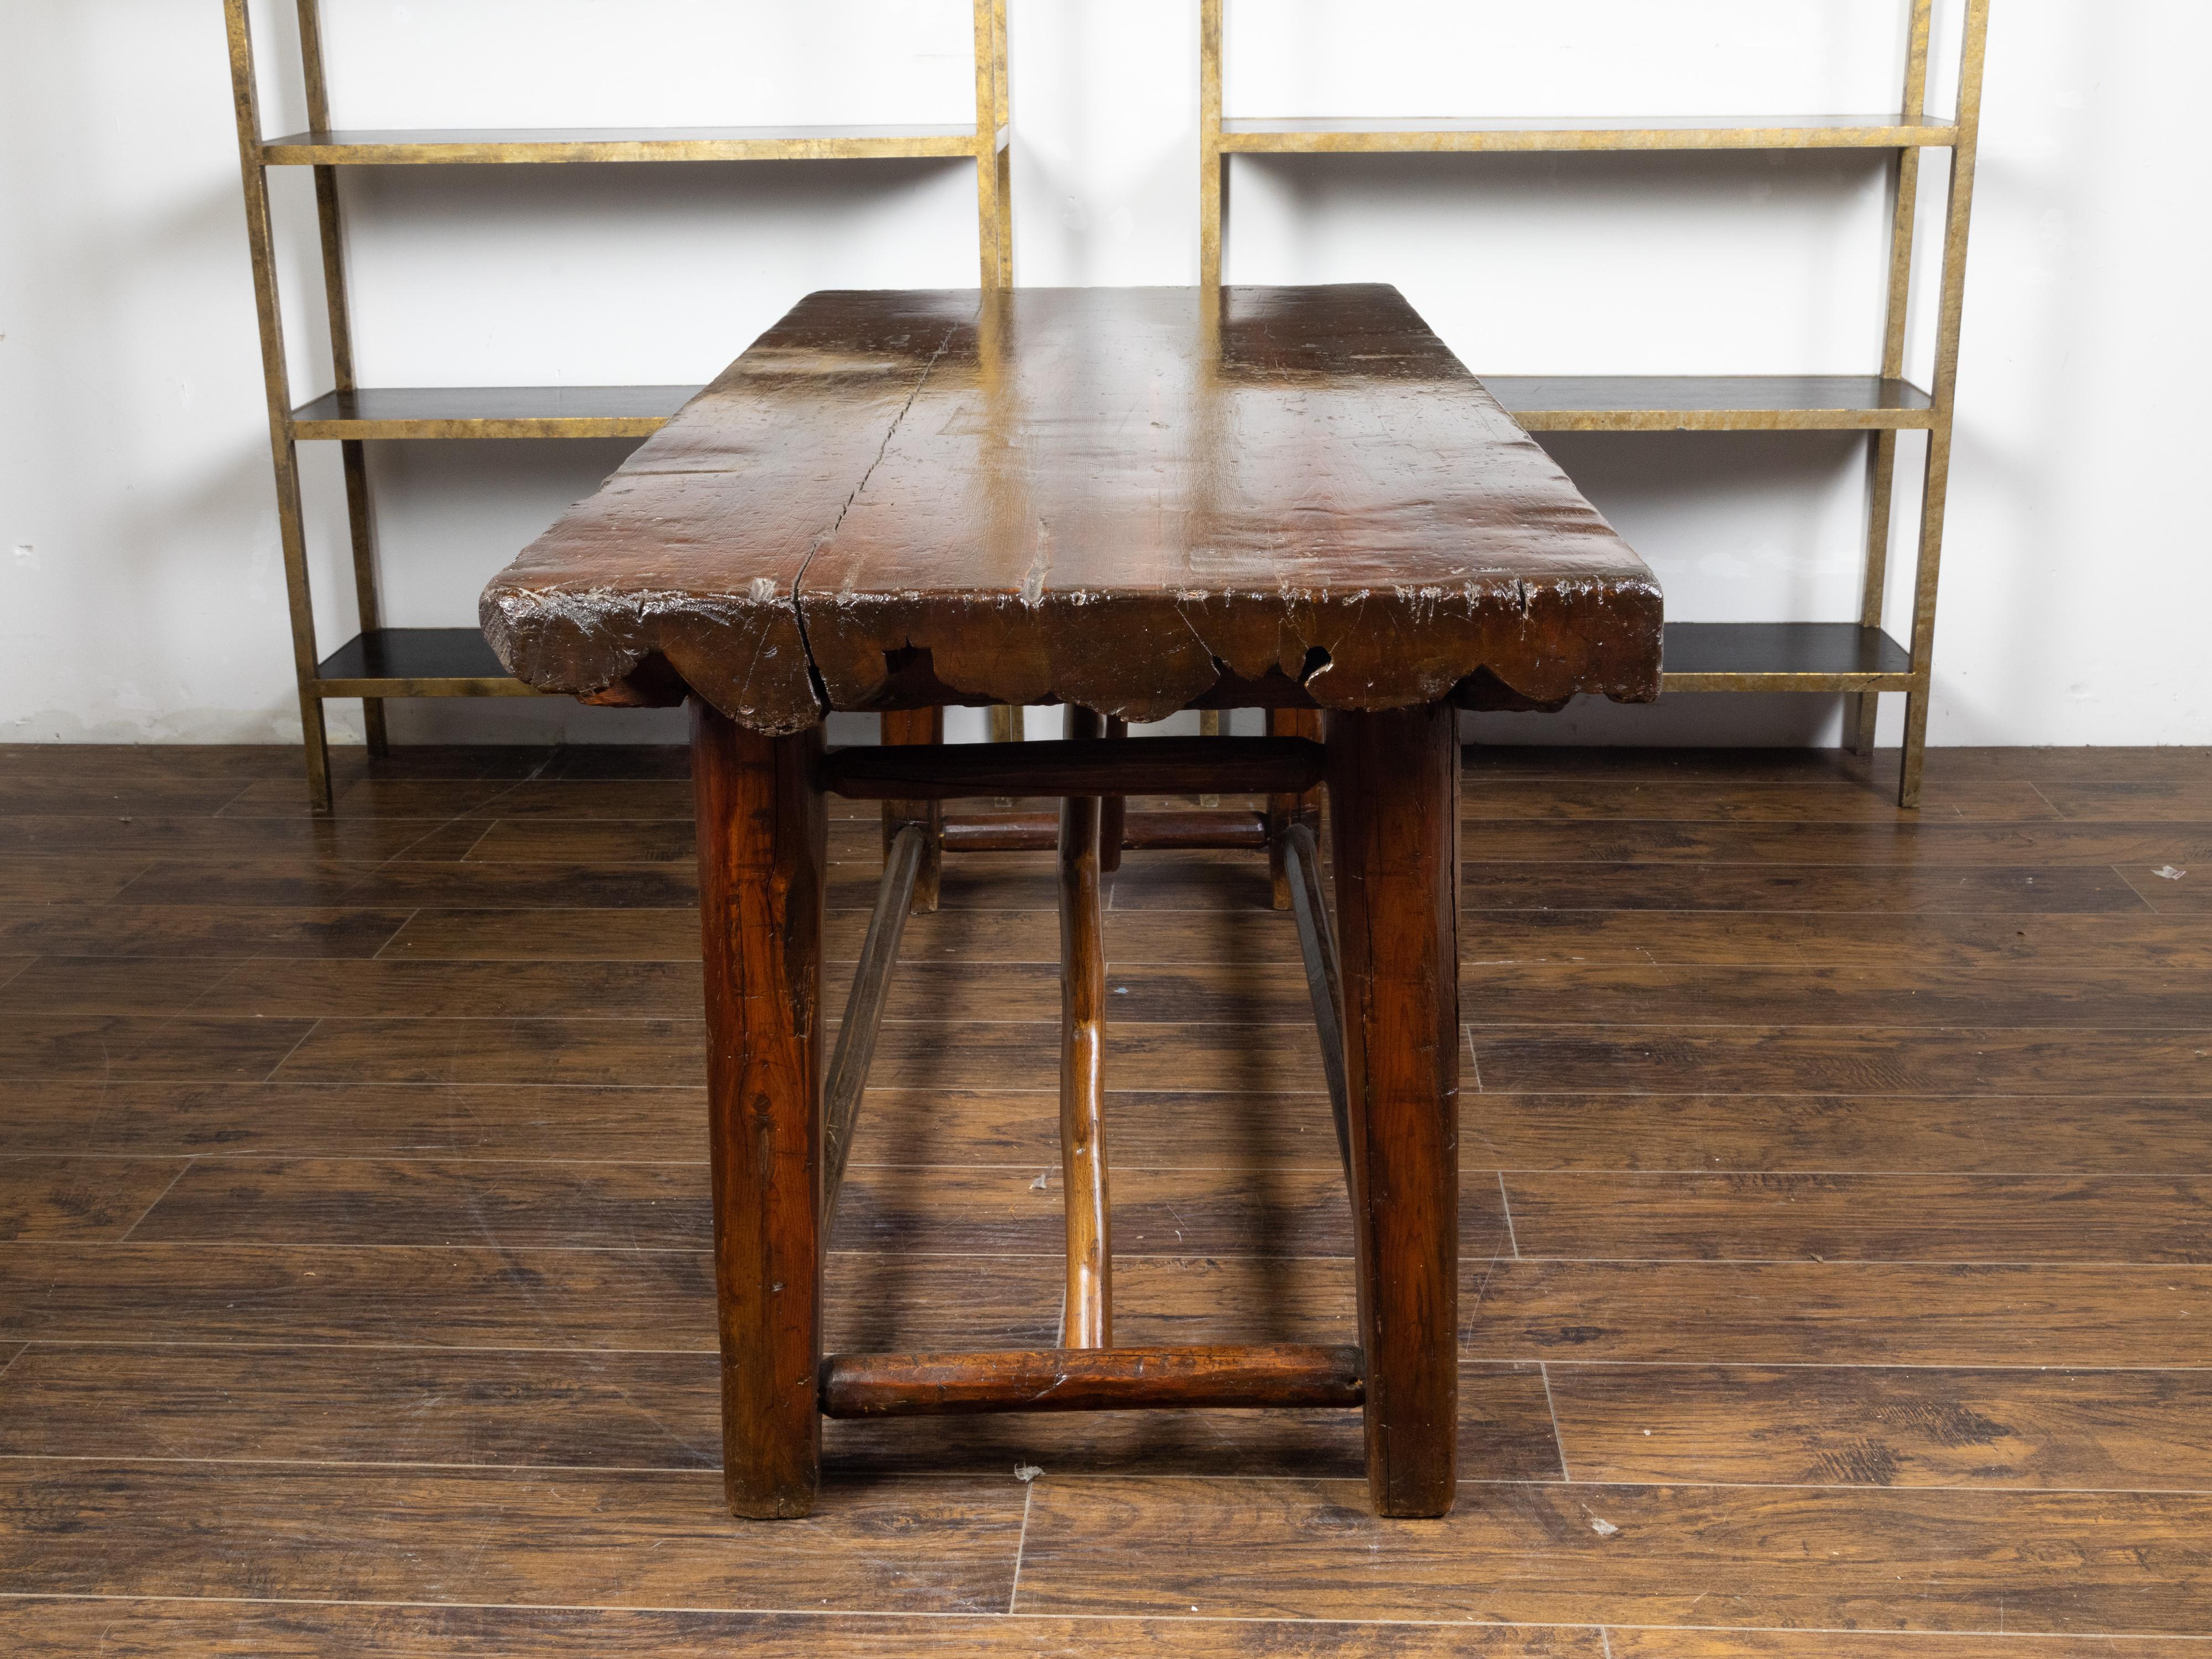 20th Century American 1900s Rustic Pine Log Table with Straight Legs and Side Stretchers For Sale